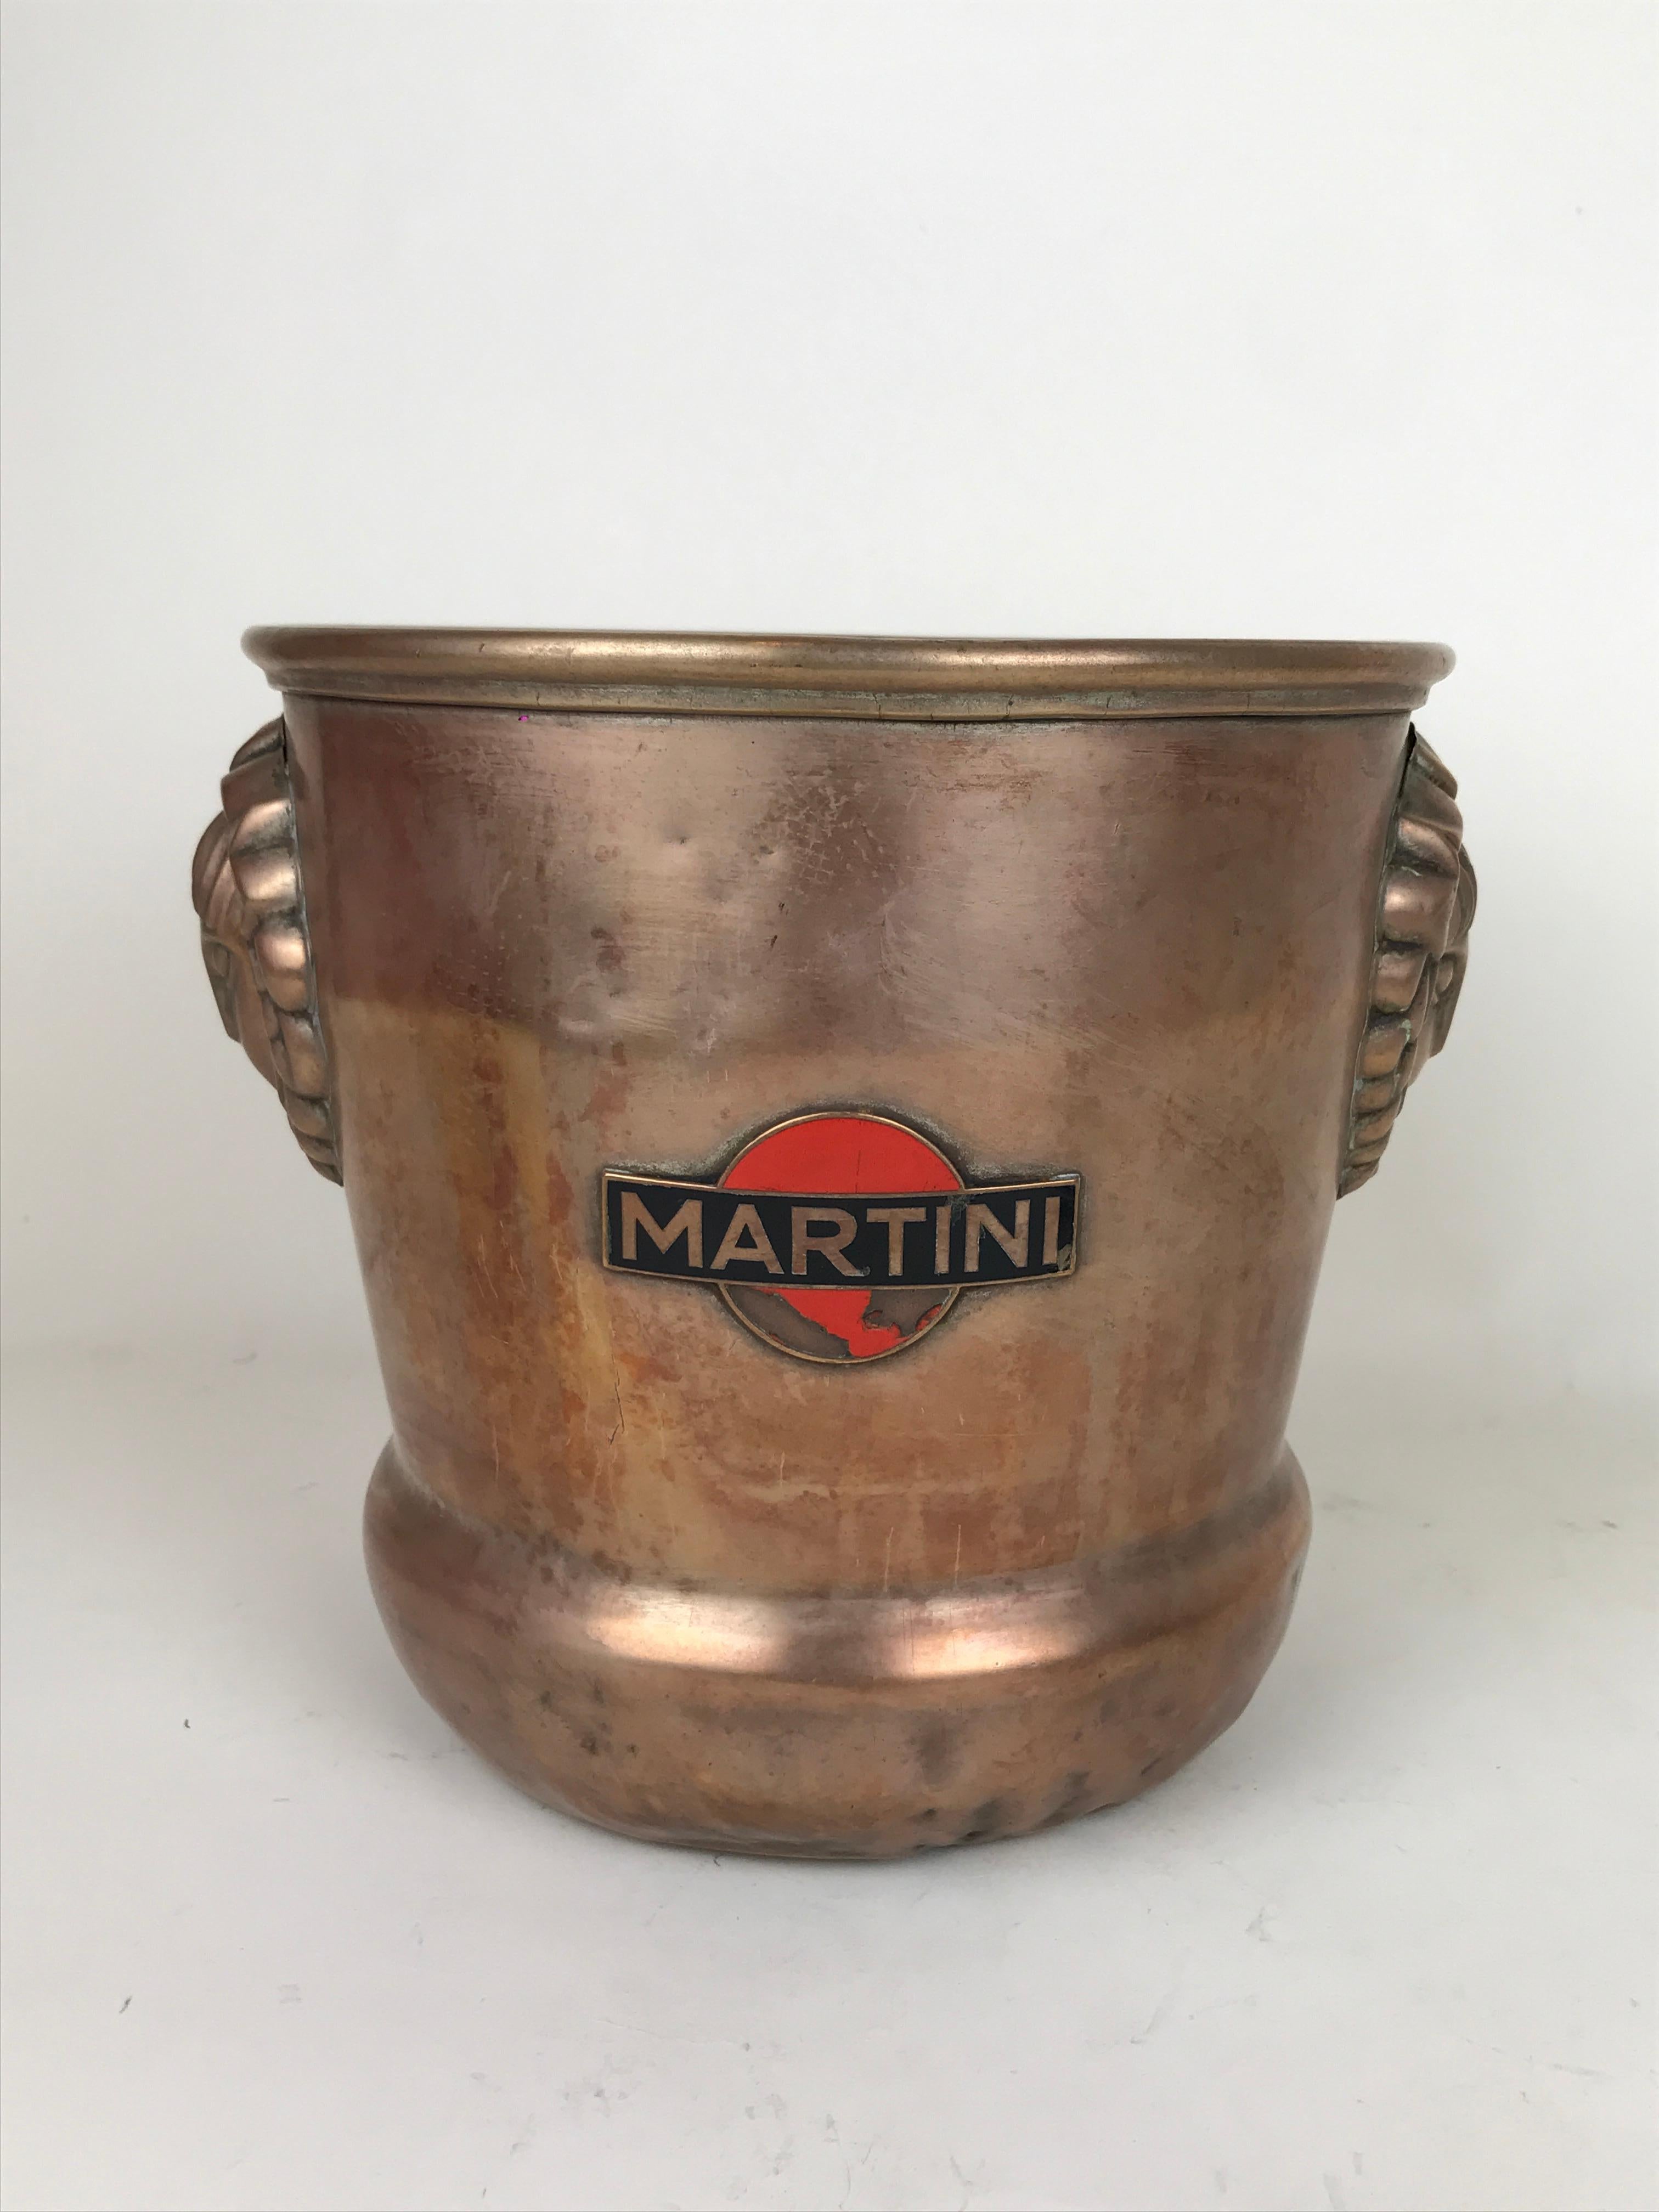 Mid-20th Century 1930s Vintage Brass Italian Ice Bucket Martini with Art Deco Reliefs Made